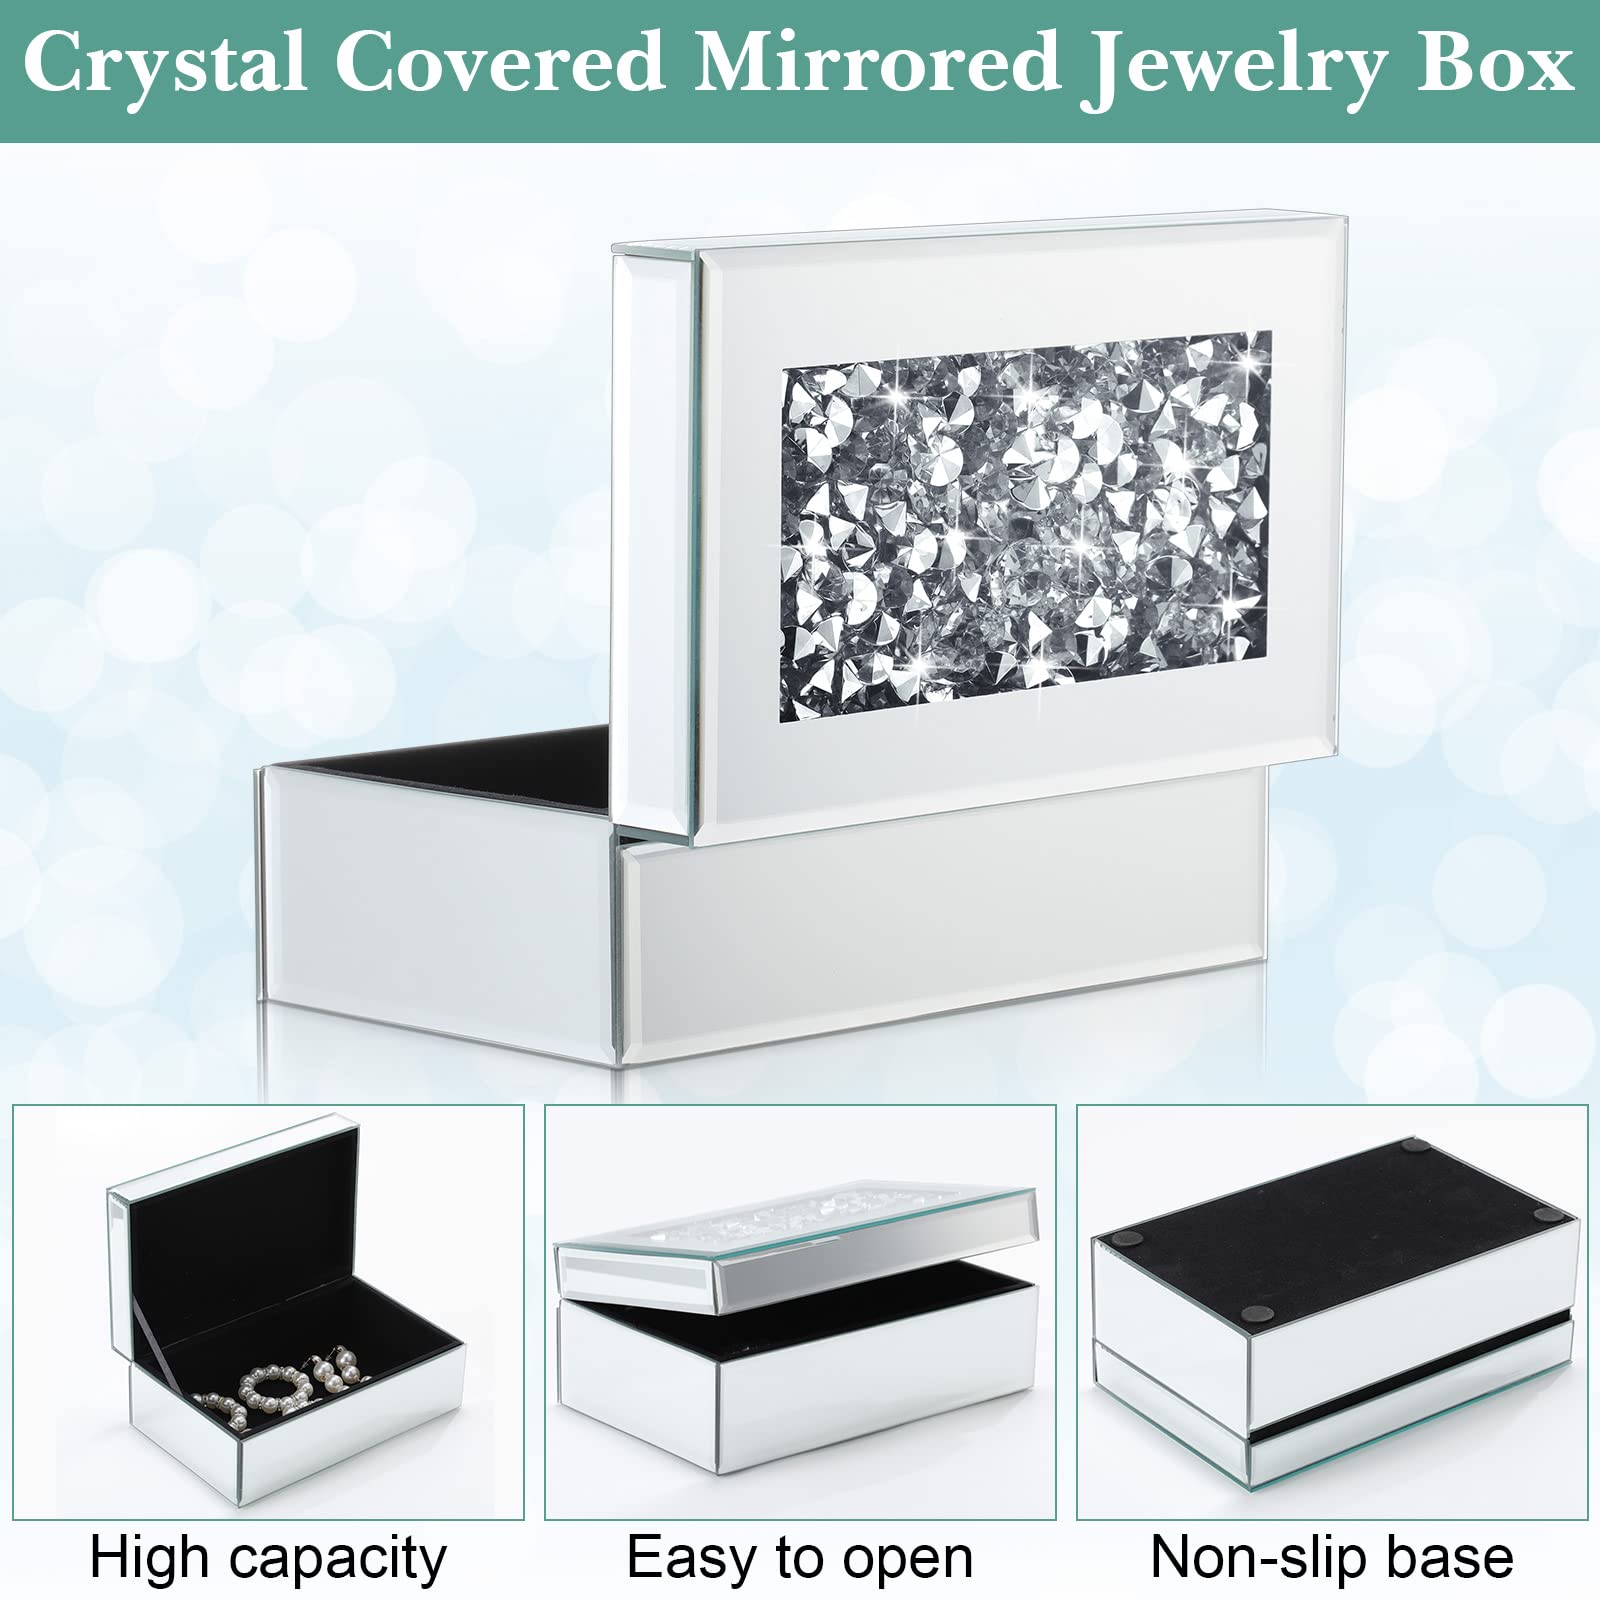 Cunno 2 Pcs Silver Crushed Diamond Glass Jewelry Box Crystal Mirrored Storage Organizer Simple Classic Mirror Box Makeup Holder for Women Ring Accessories Vanity Dresser Decor